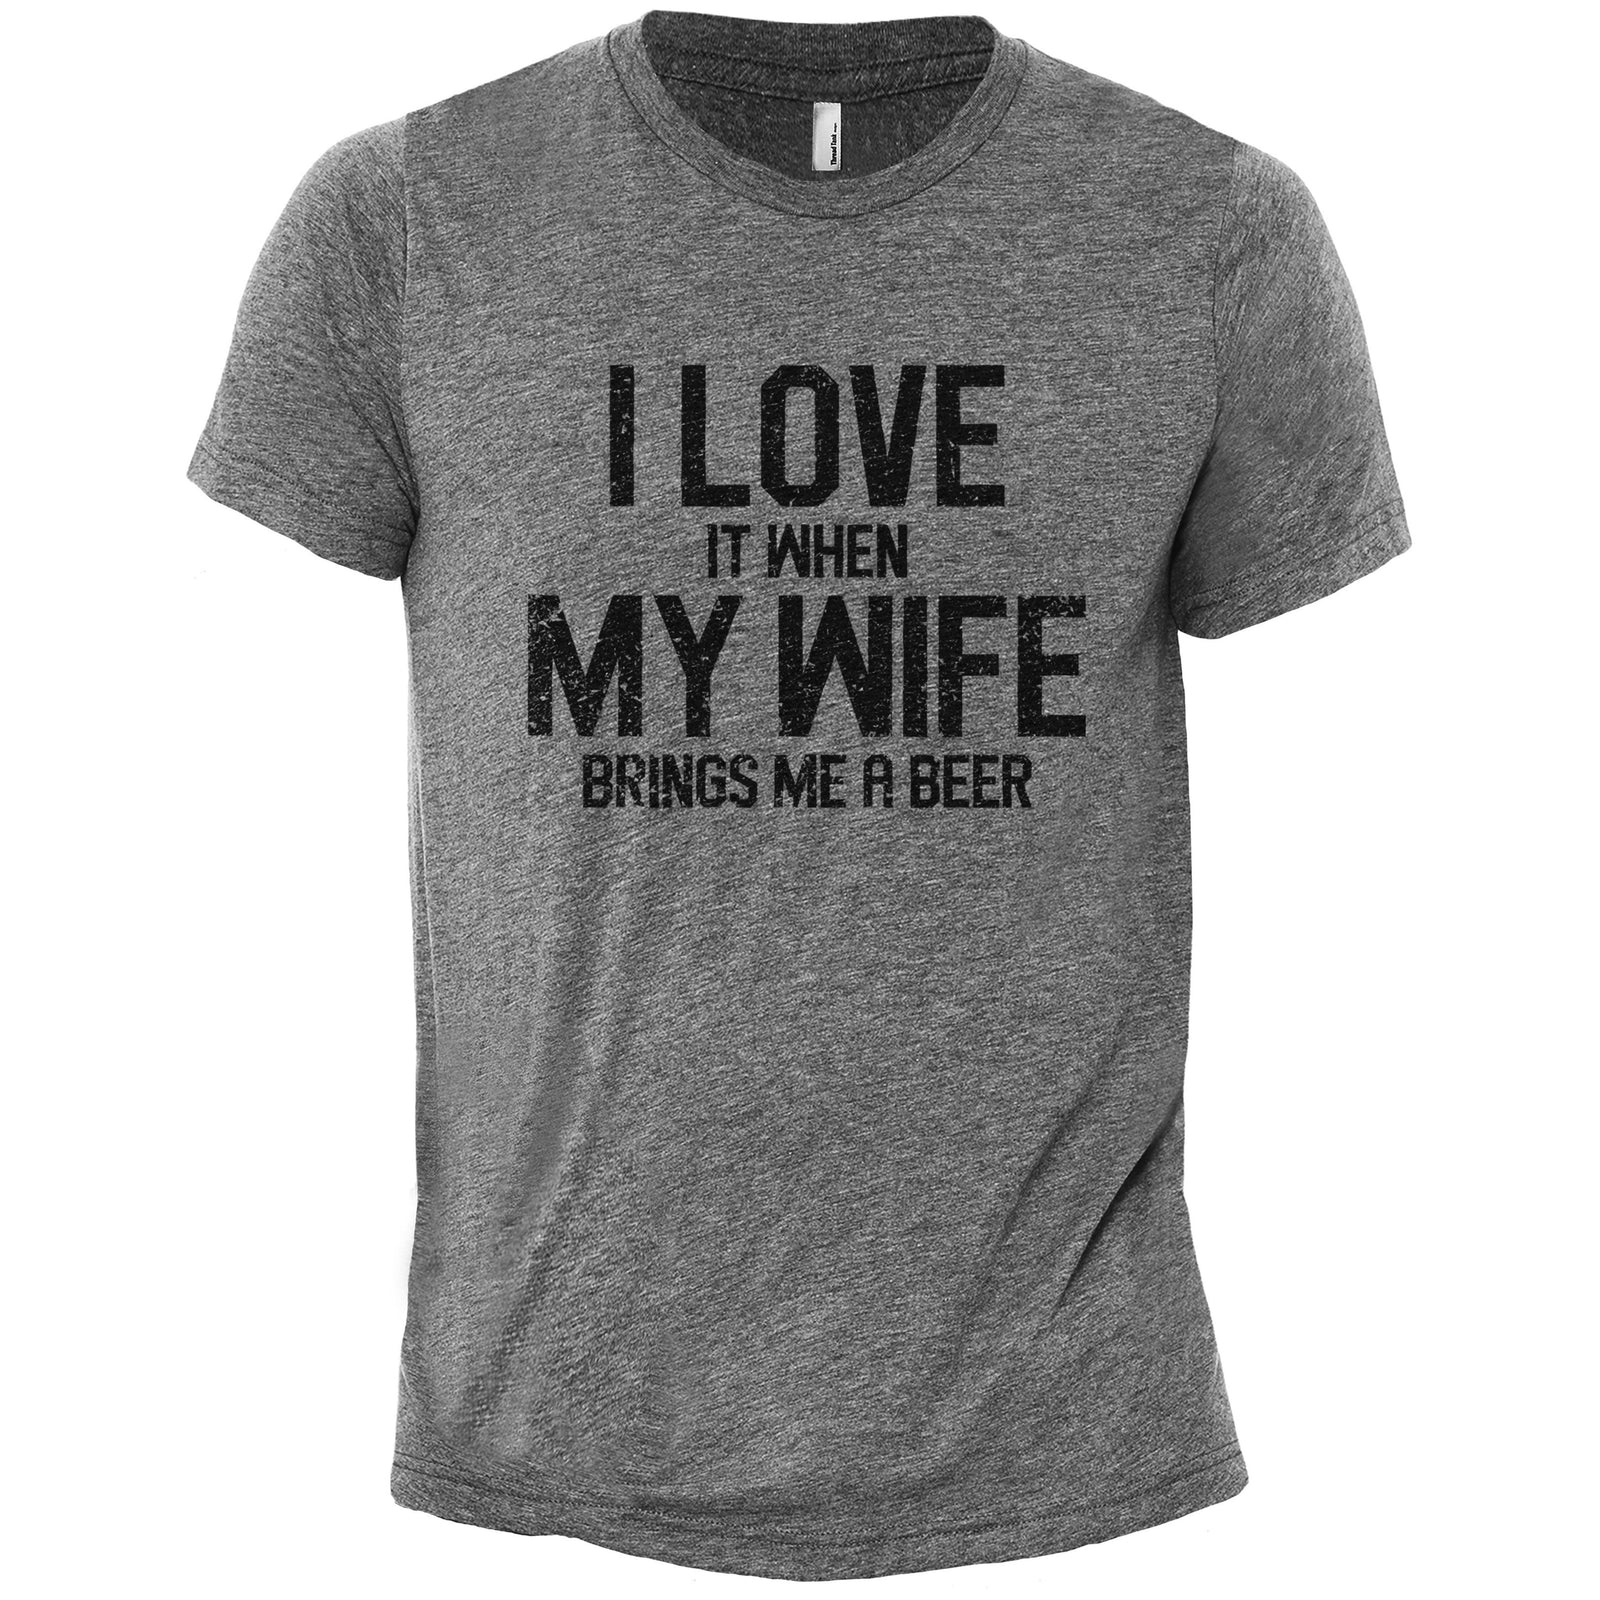 I Love It When My Wife Lets Me Go Fishing Printed Graphic Men's Crew T-Shirt Tee